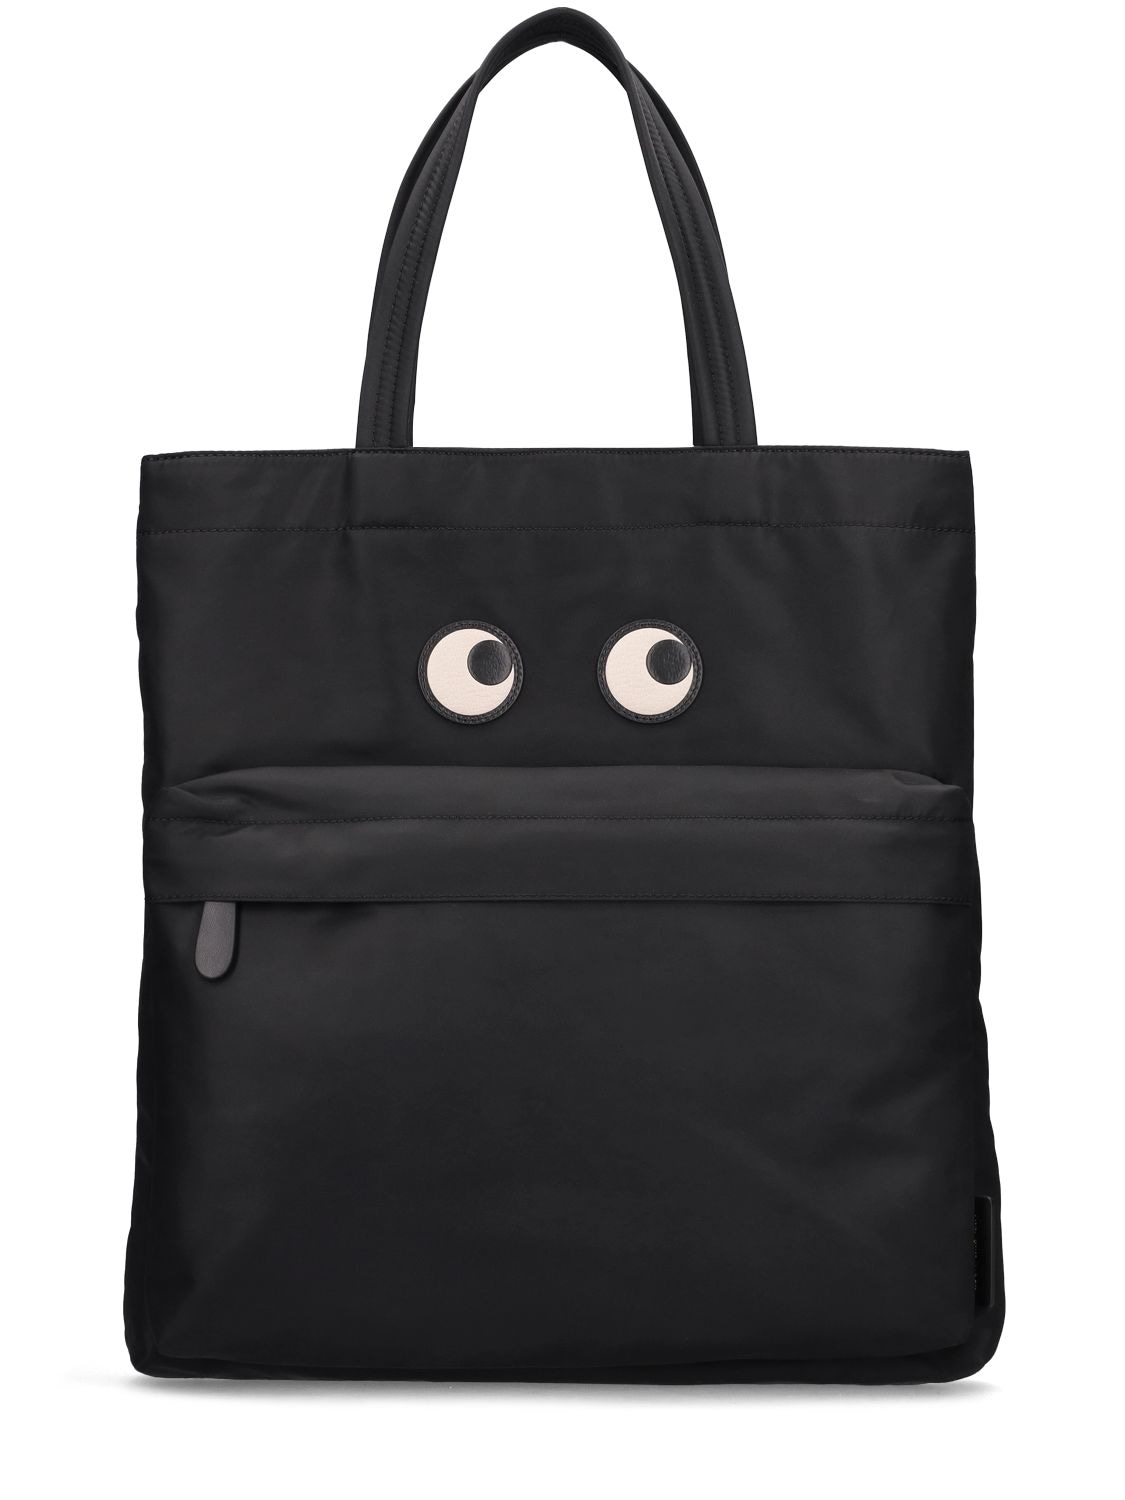 Shop Now For The Eyes Recycled Nylon Tote Bag | AccuWeather Shop